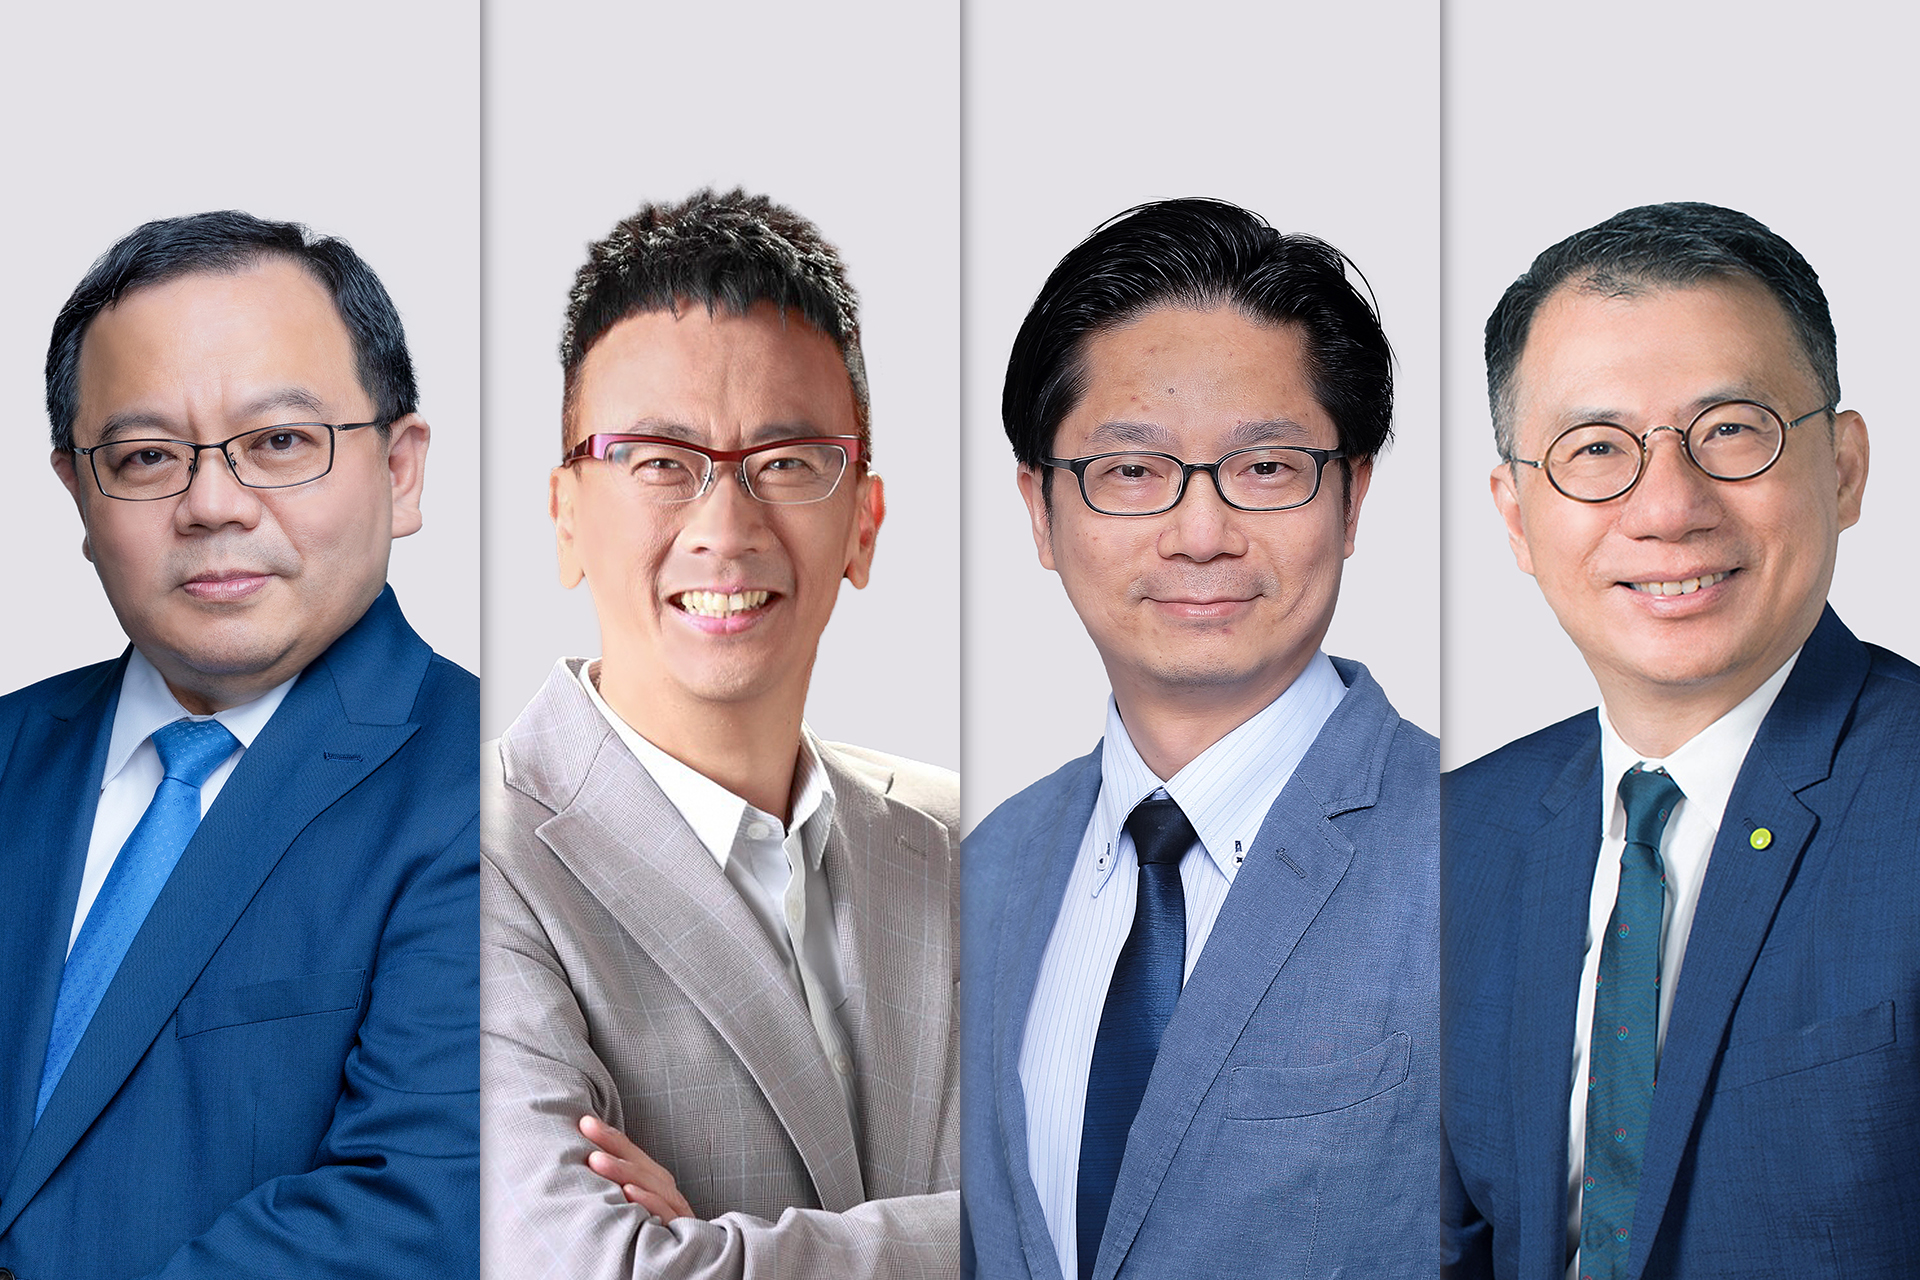 The four Distinguished Alumni Award recipients include (from left) Professor Chan Wing-kwong, Mr Cheng Tan-shui, Professor Leo Poon and Mr Patrick Tsang.